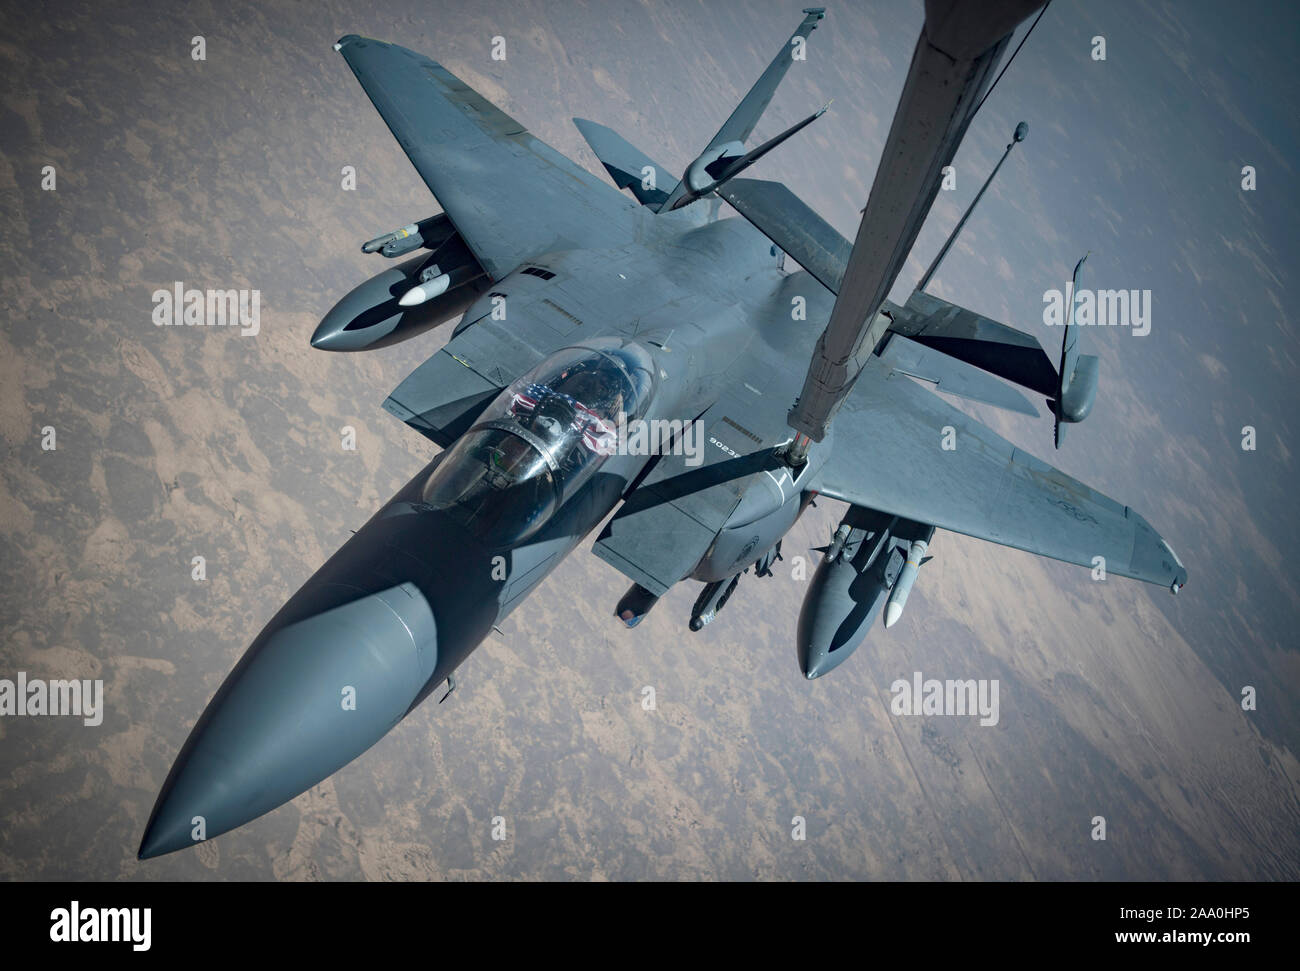 An F-15E Strike Eagle conducts aerial refueling with a KC-10 Extender from the 908th Expeditionary Air Refueling Squadron, July 2, 2019, within U.S. Central Command’s area of responsibility. The fighter aircraft performs air-to-air and air-to-ground missions using the pilot to detect, target and engage aerial threats and a weapons system officer to designate ground targets. The F-15 is an all-weather, extremely maneuverable, tactical fighter designed to permit the Air Force to gain and maintain air superiority over the battlefield. Stock Photo